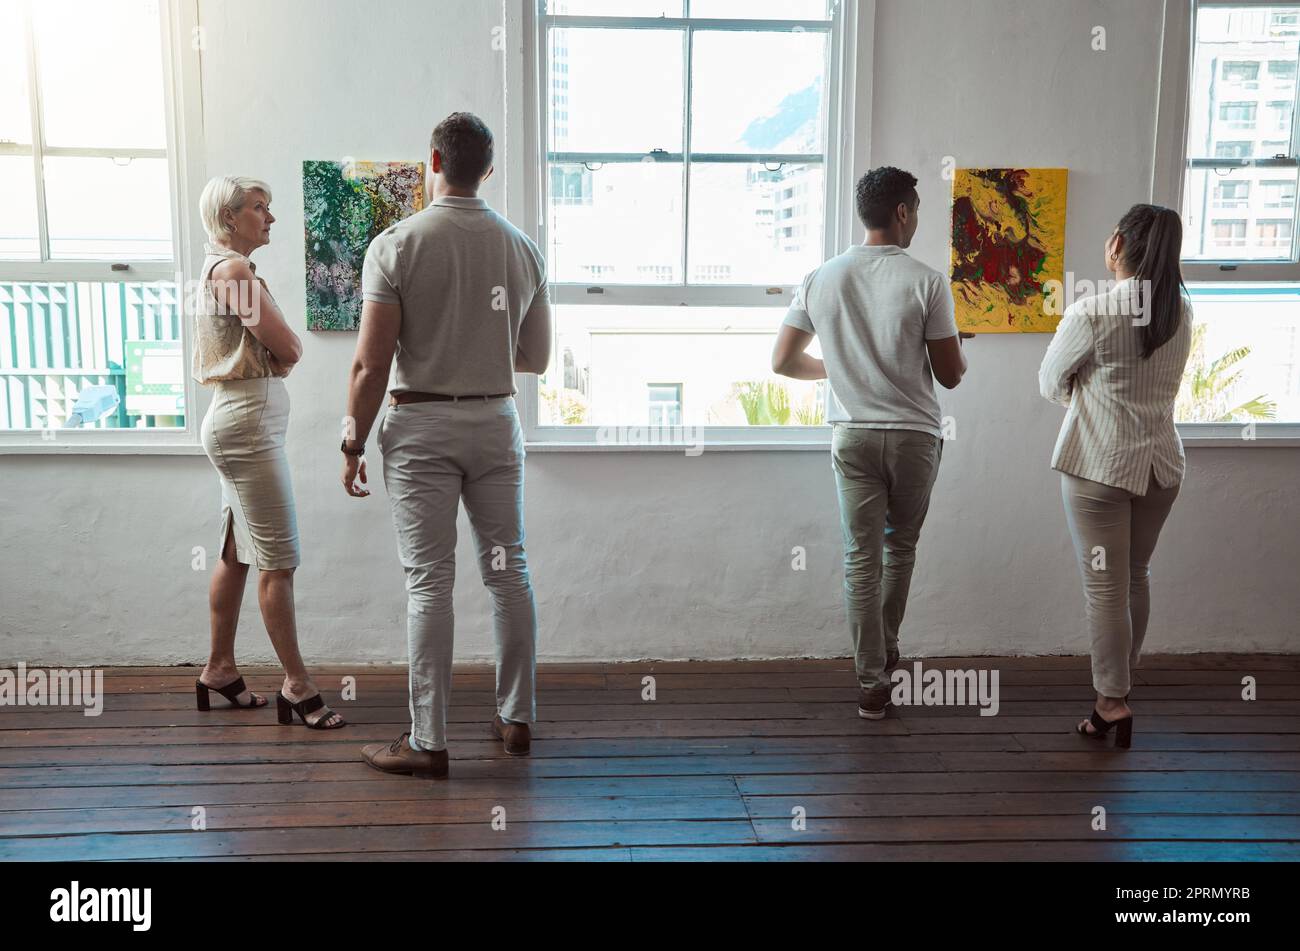 Art, painting and men and women at a gallery exhibition with paintings. Culture, creativity and sales, museum visitors standing at a canvas. Beauty, presentation and discussion on creative artwork. Stock Photo